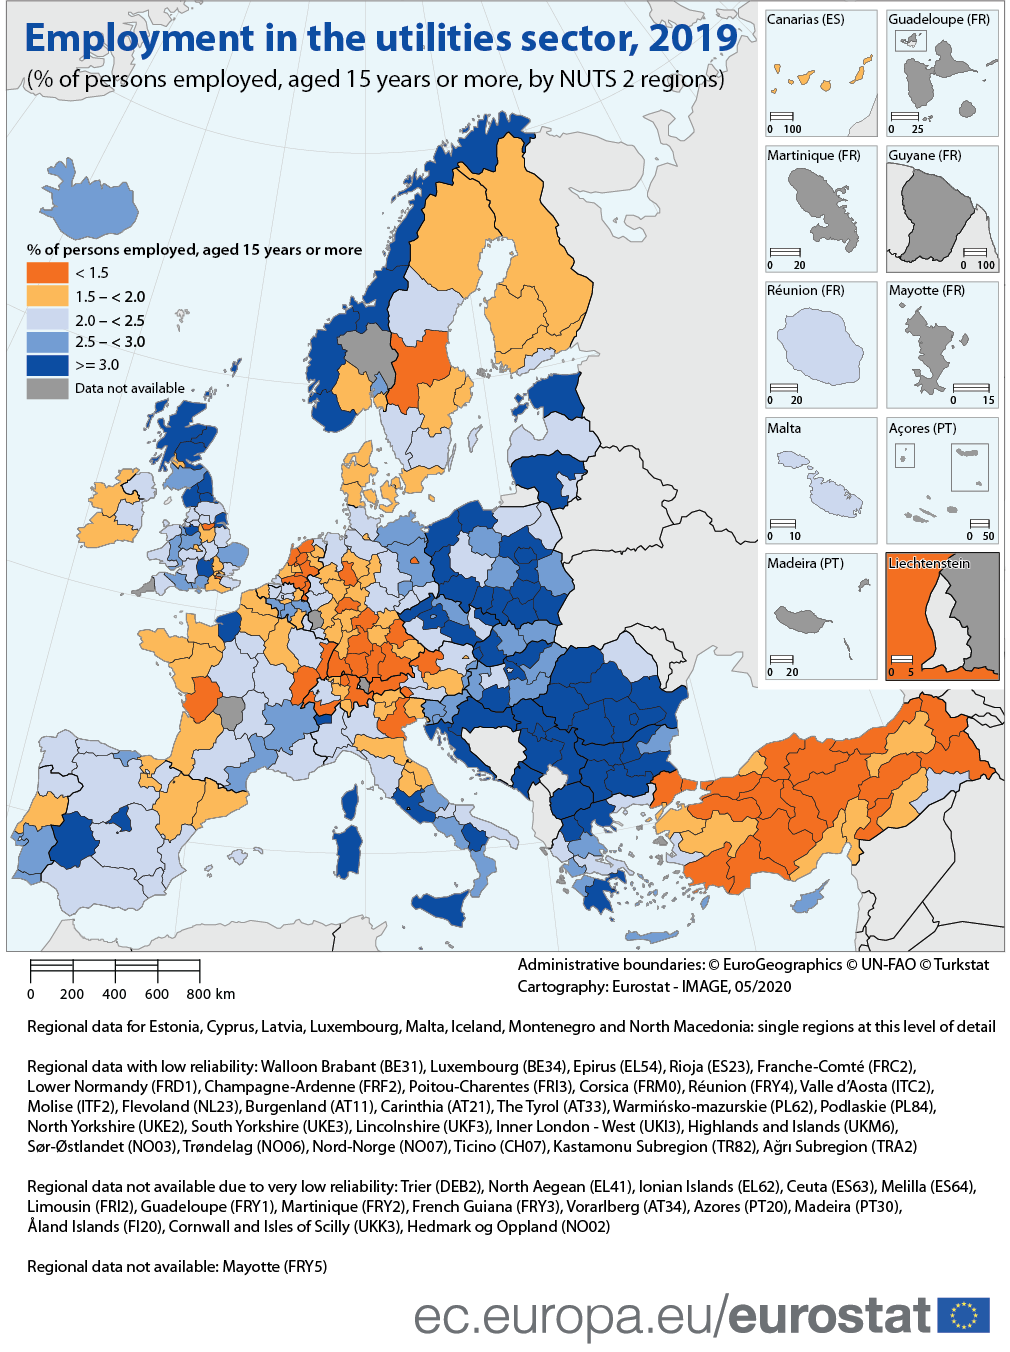 Map: Employment in the utilities sector, 2019 (per cent of persons employed, aged 15 years or more, by NUTS 2 regions)